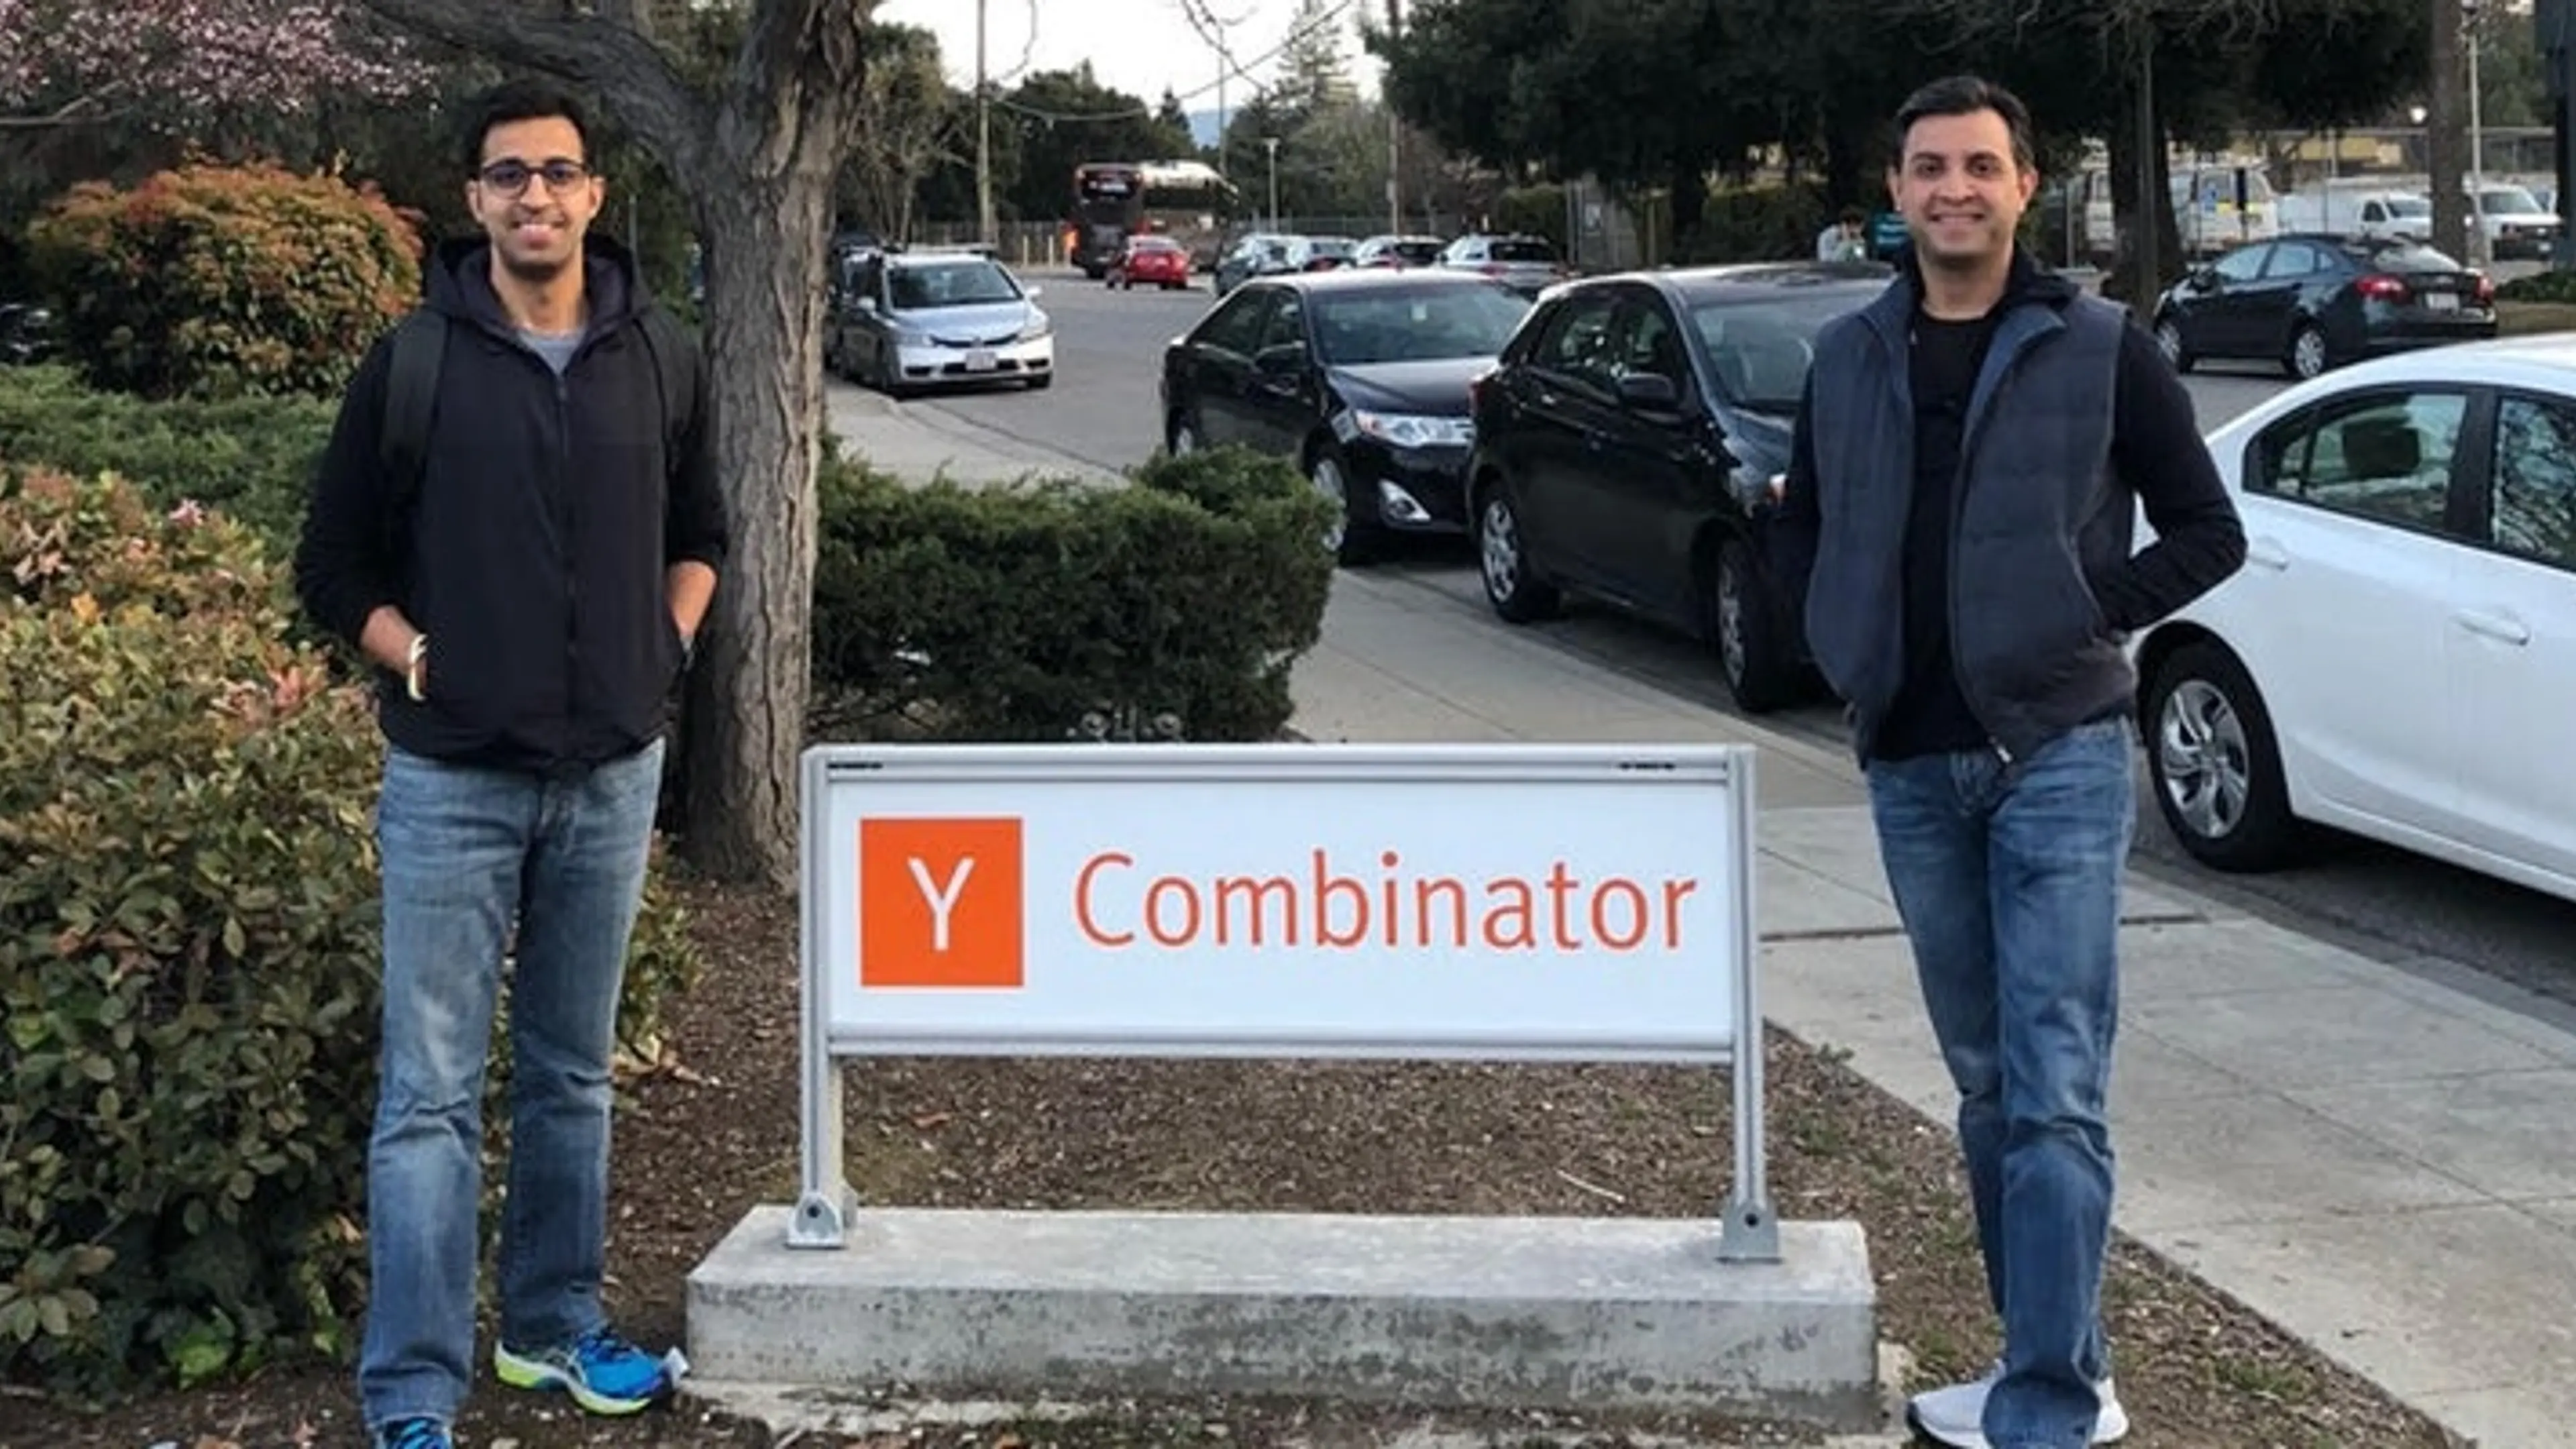 Here's how this Y Combinator-backed startup combines trust and technology to provide background checks 